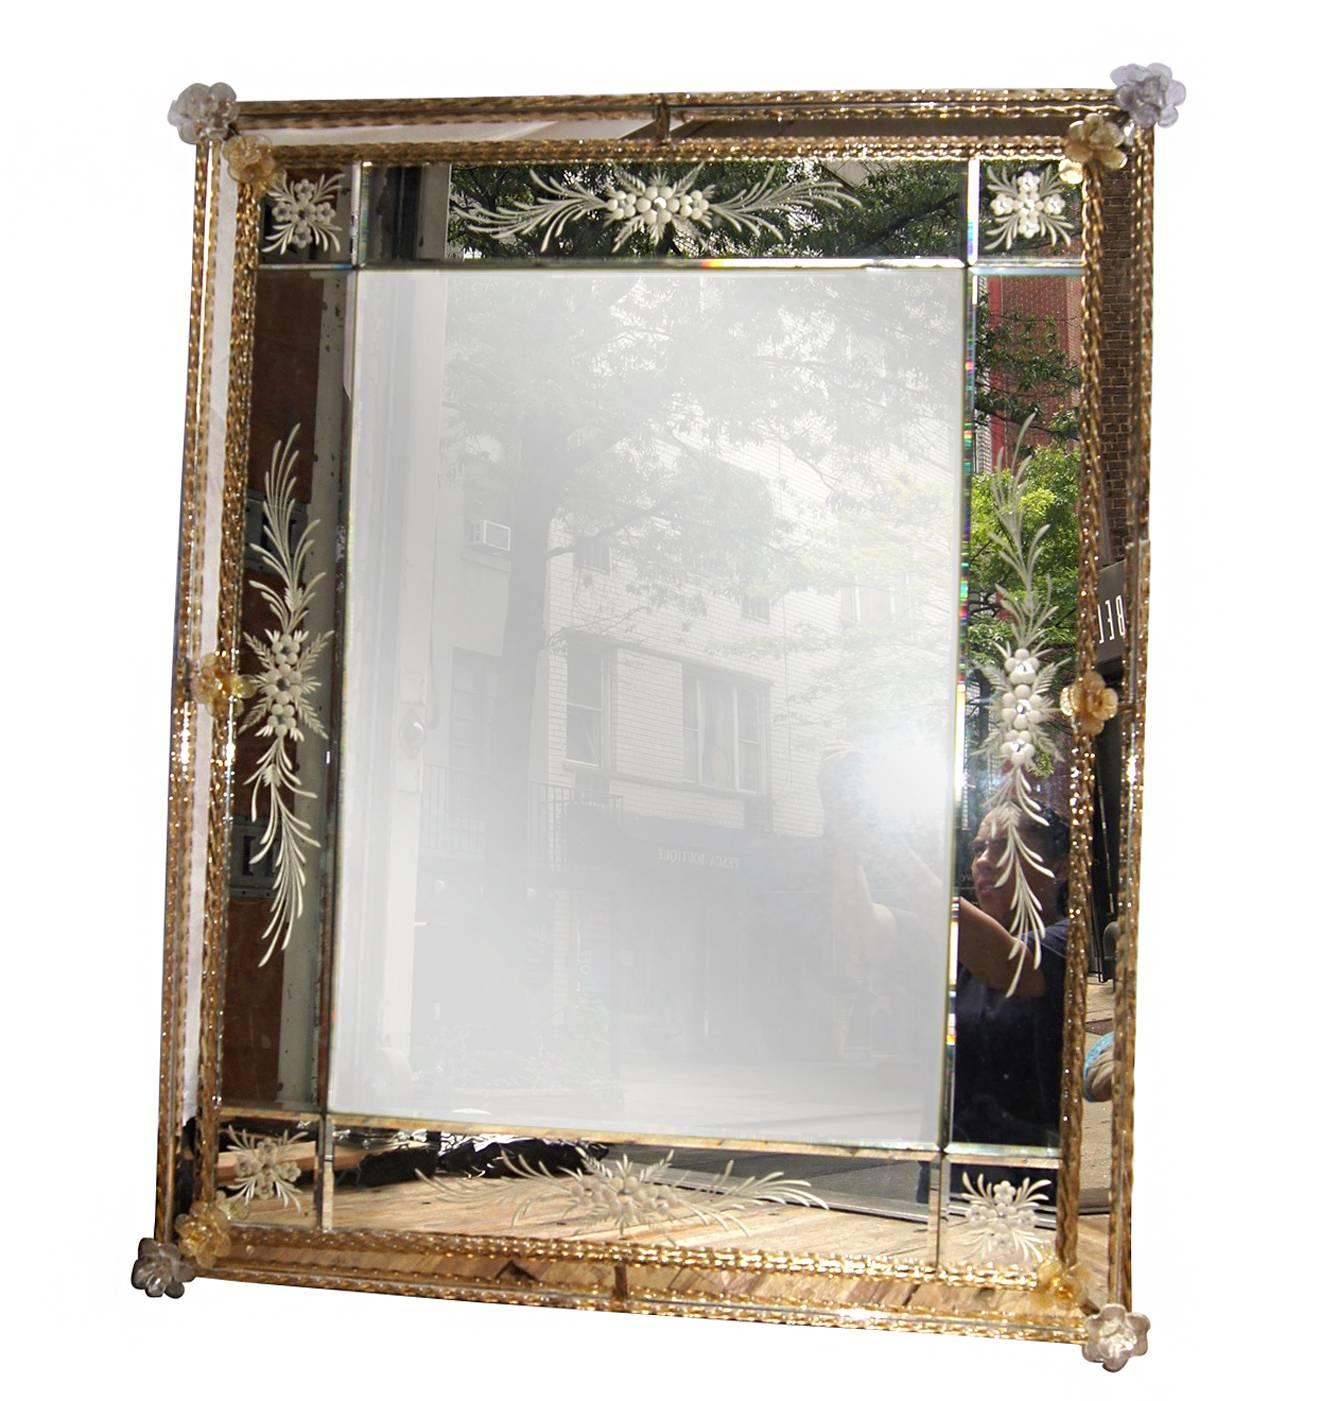 Venetian etched mirror with twirled glass along the frame and handblown flowers, circa 1930s.

Measurements:
Height: 40